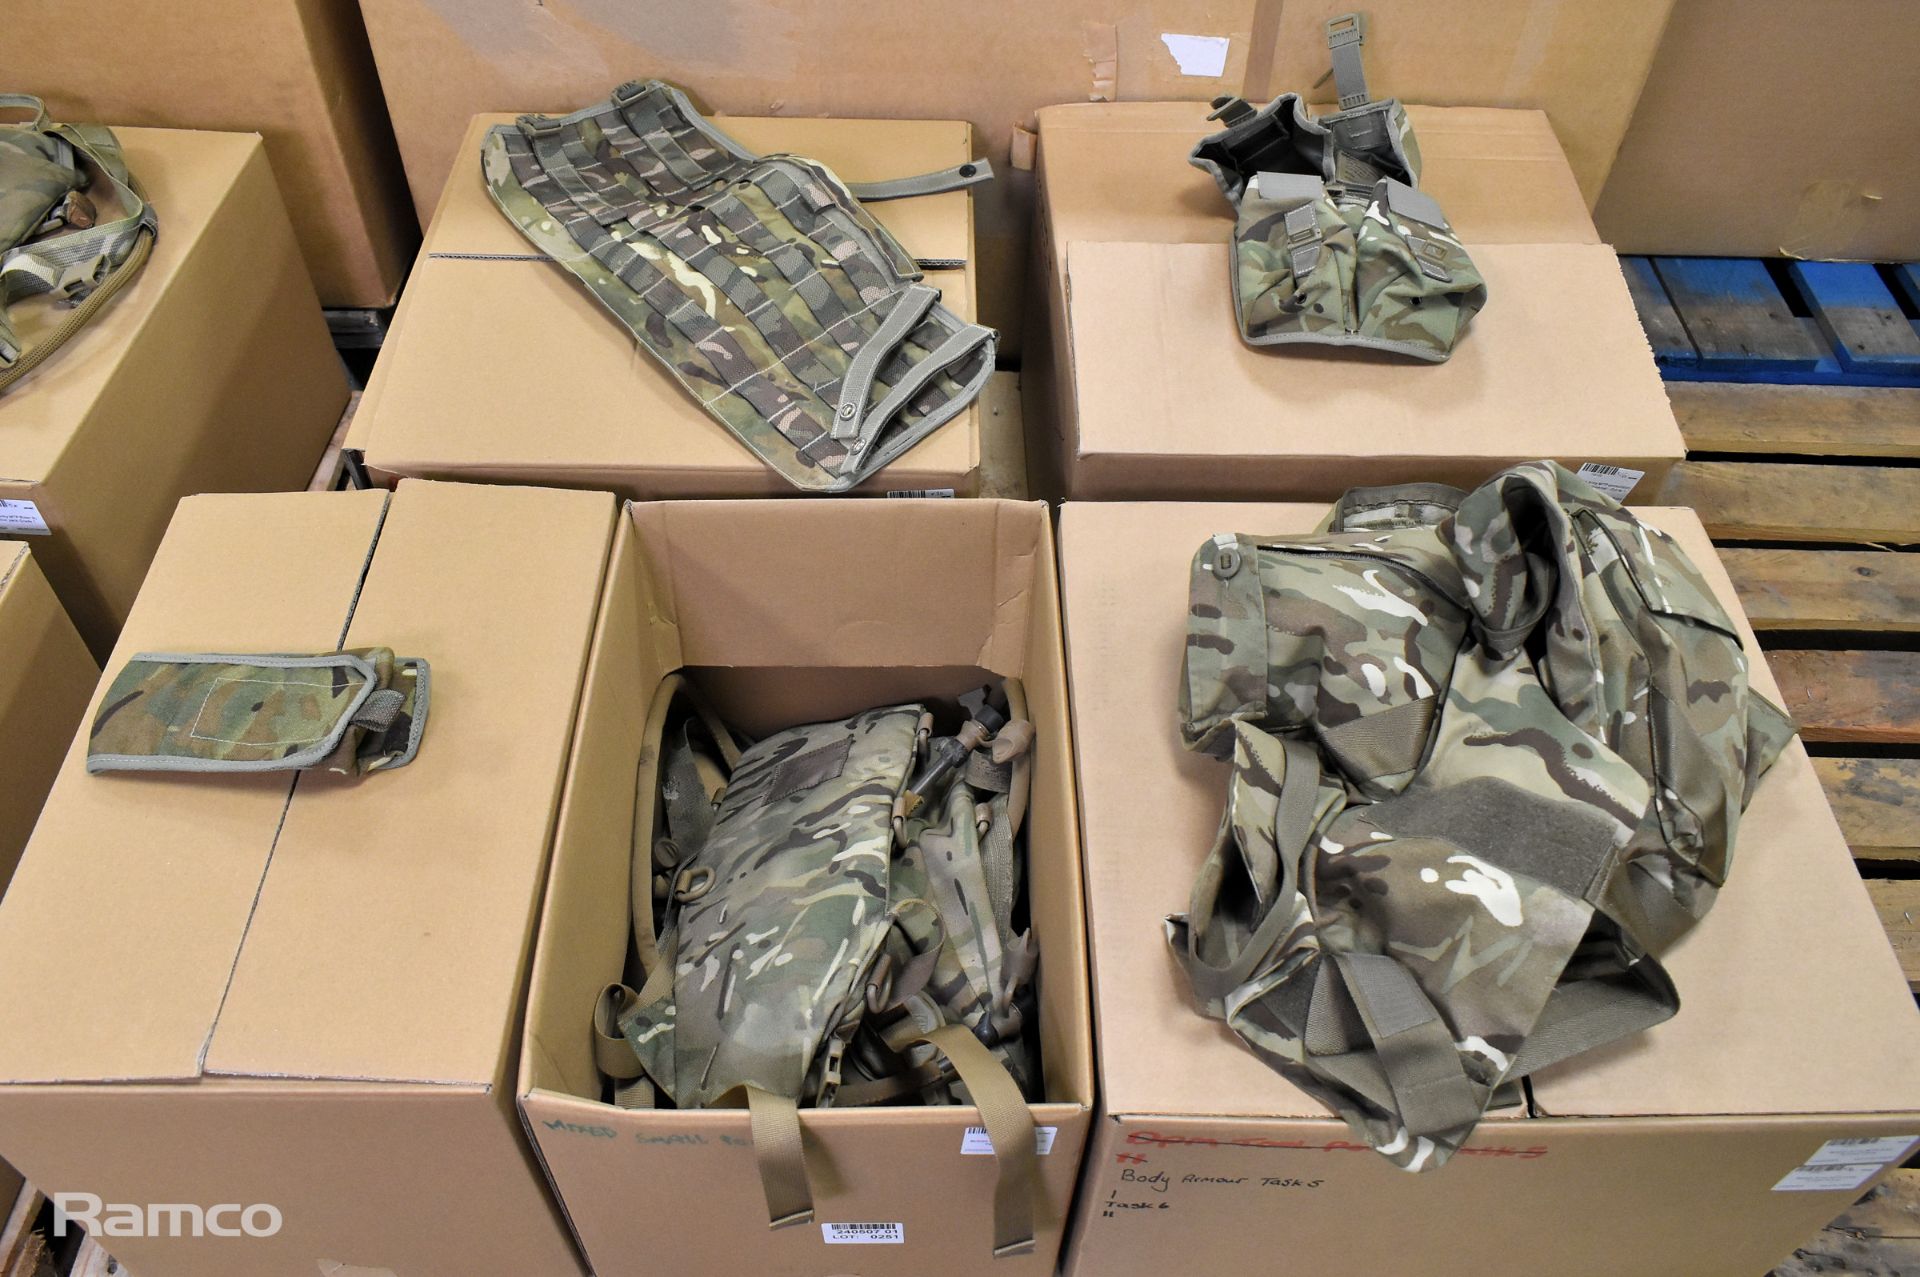 British Army body covers & ammunition pouches - see description for details